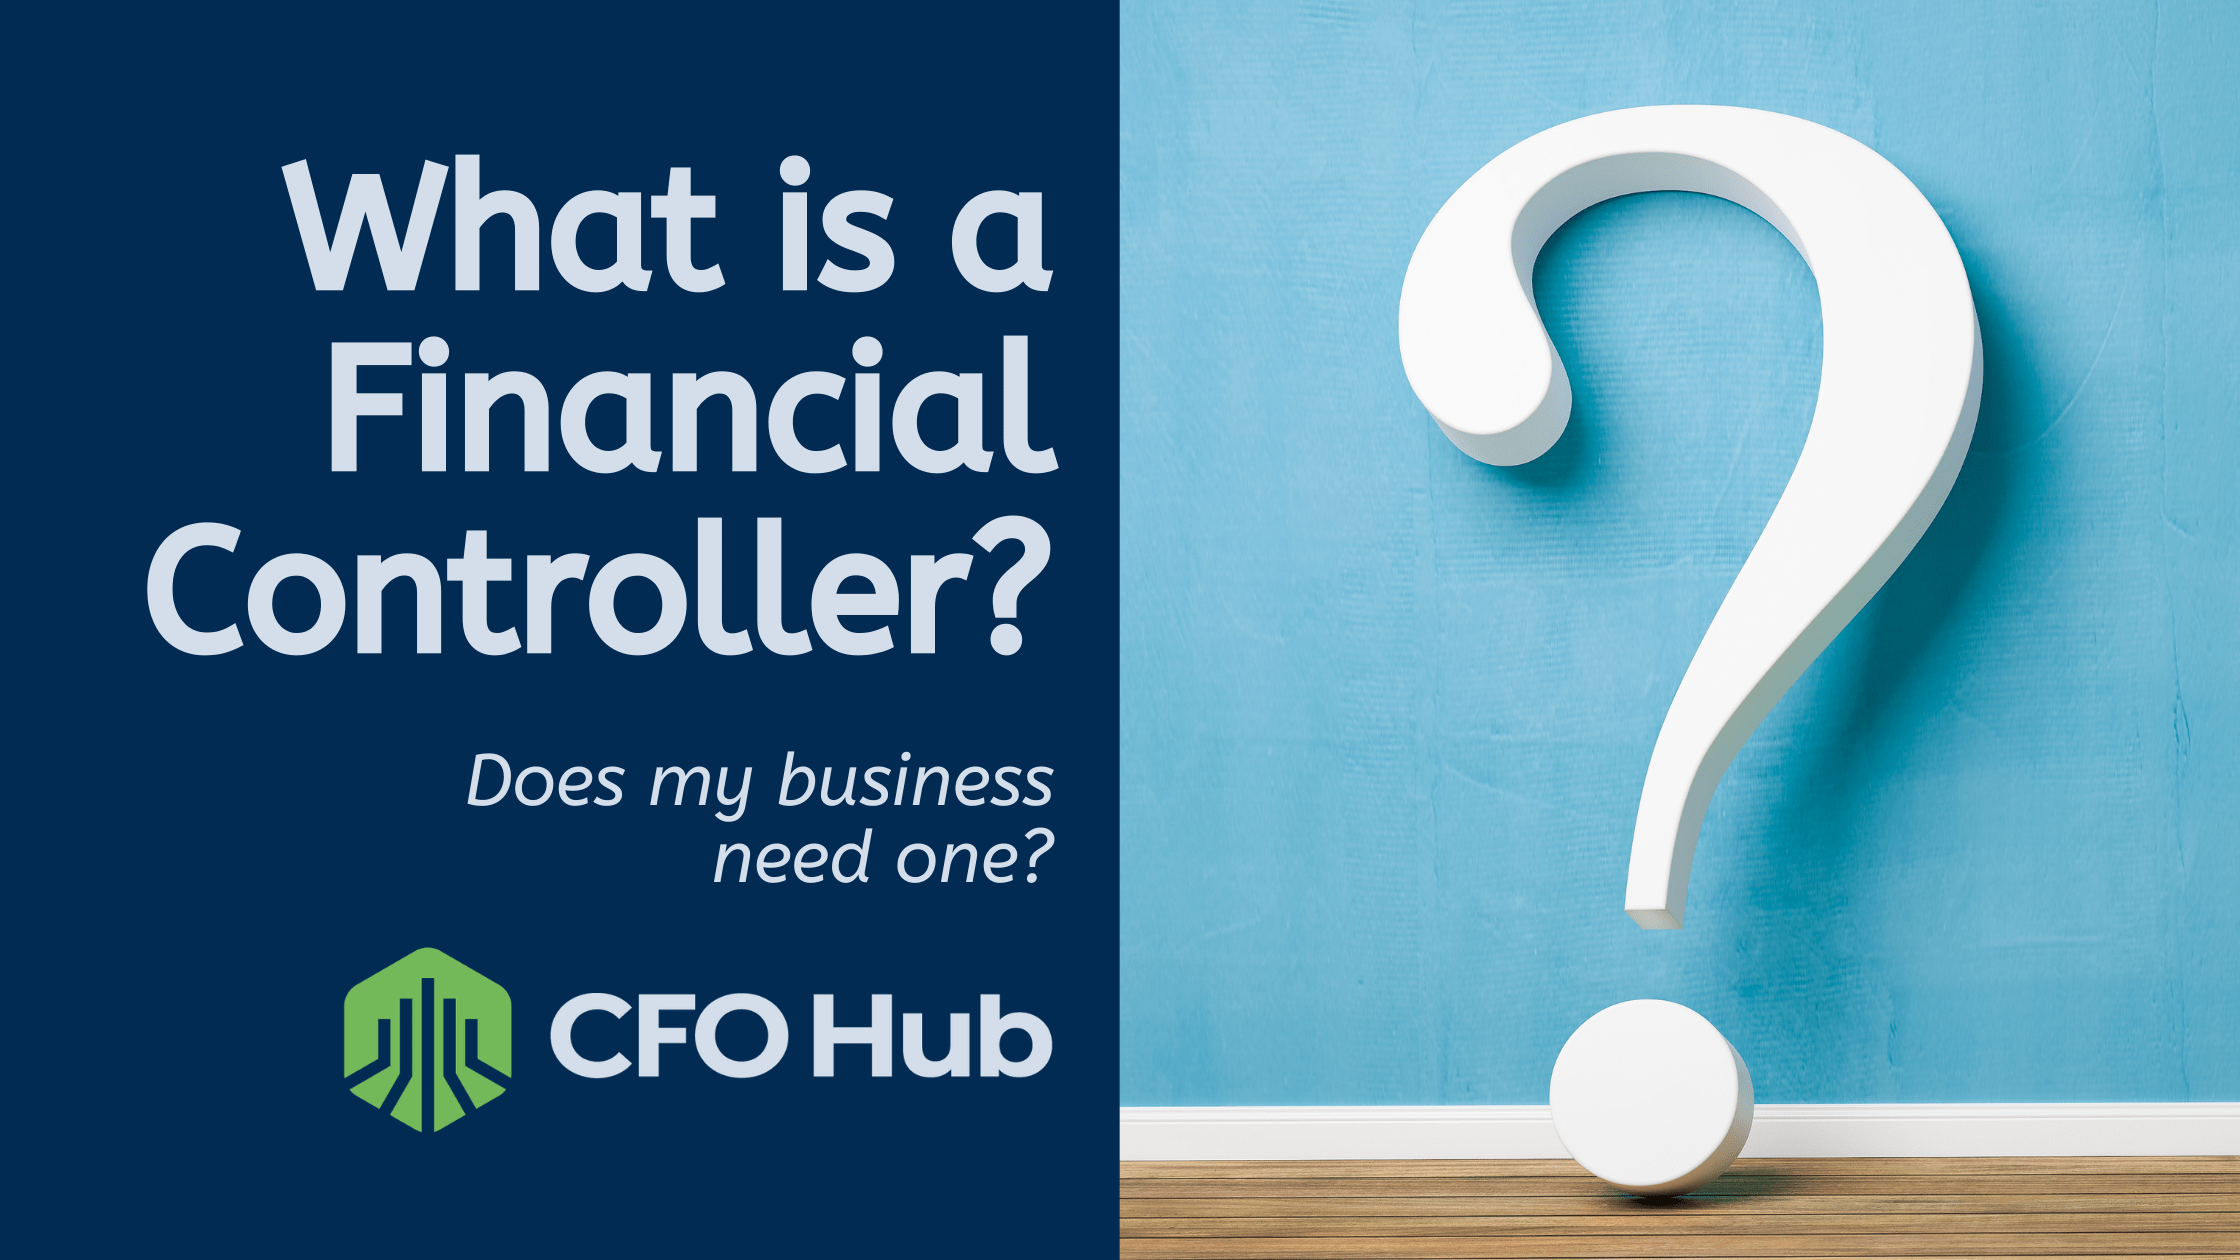 What is a financial controller?